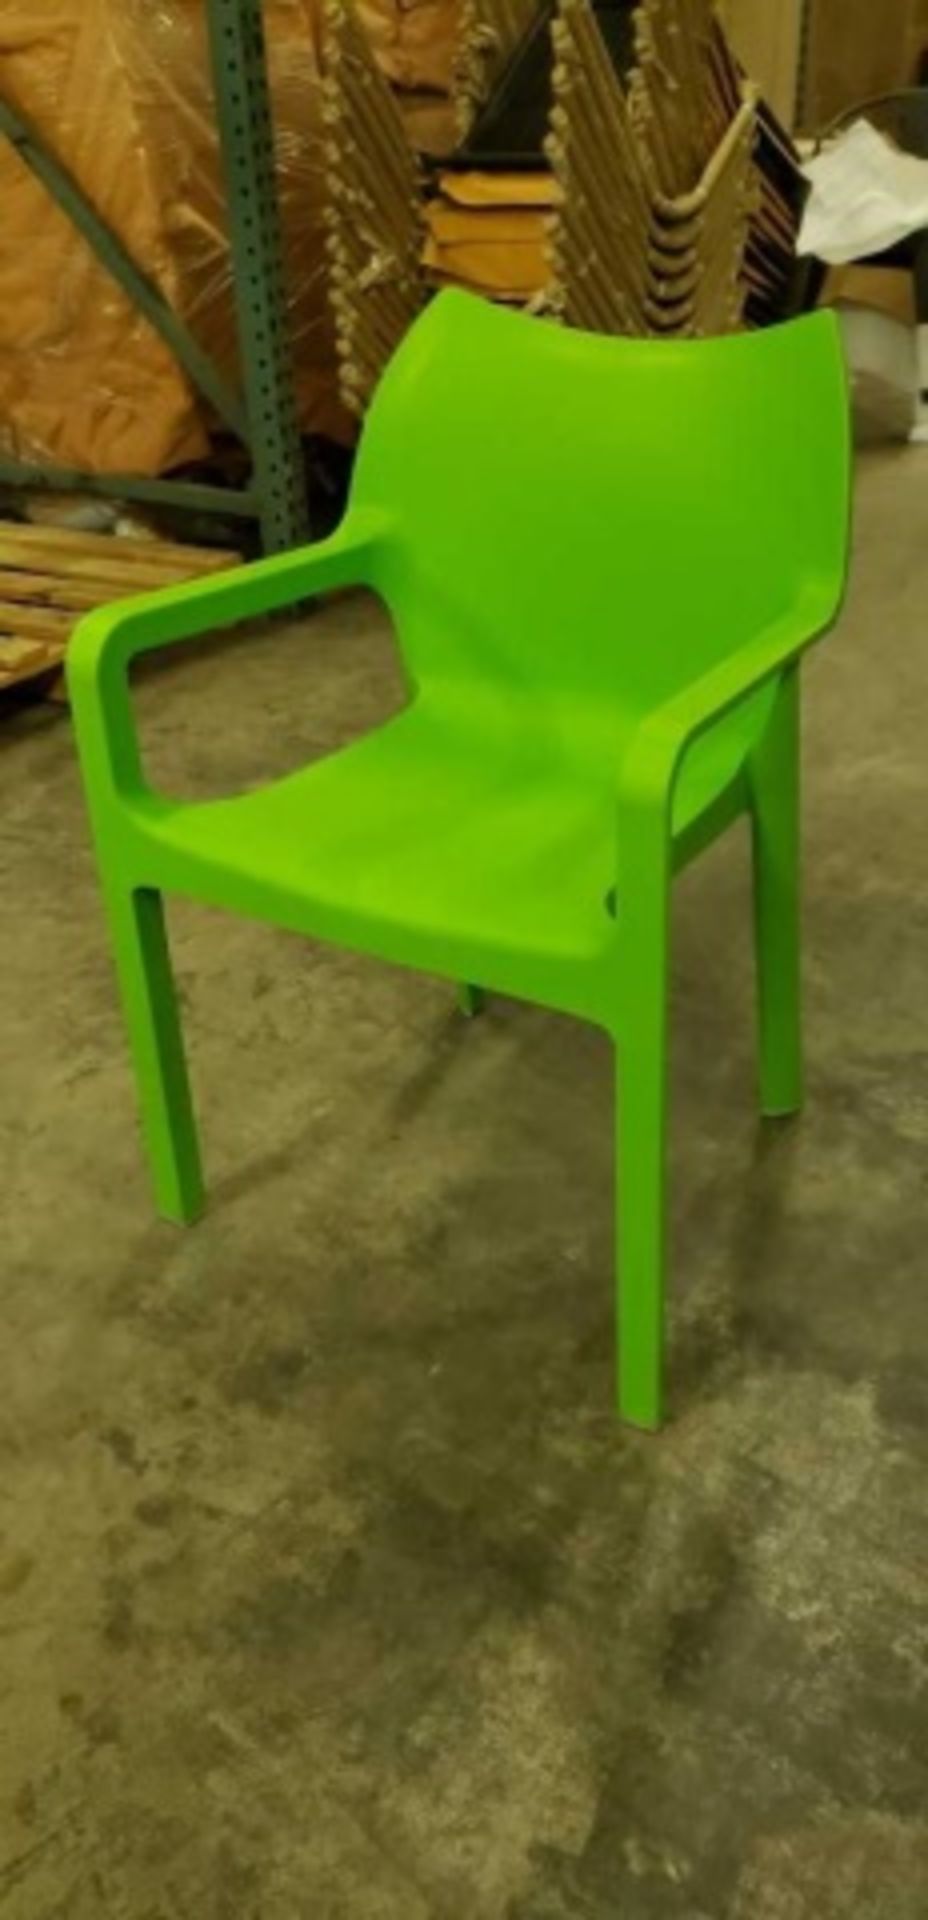 Martinique Arm Chair - green, 7 boxes w/ 4 each, 28 total. - Image 2 of 5